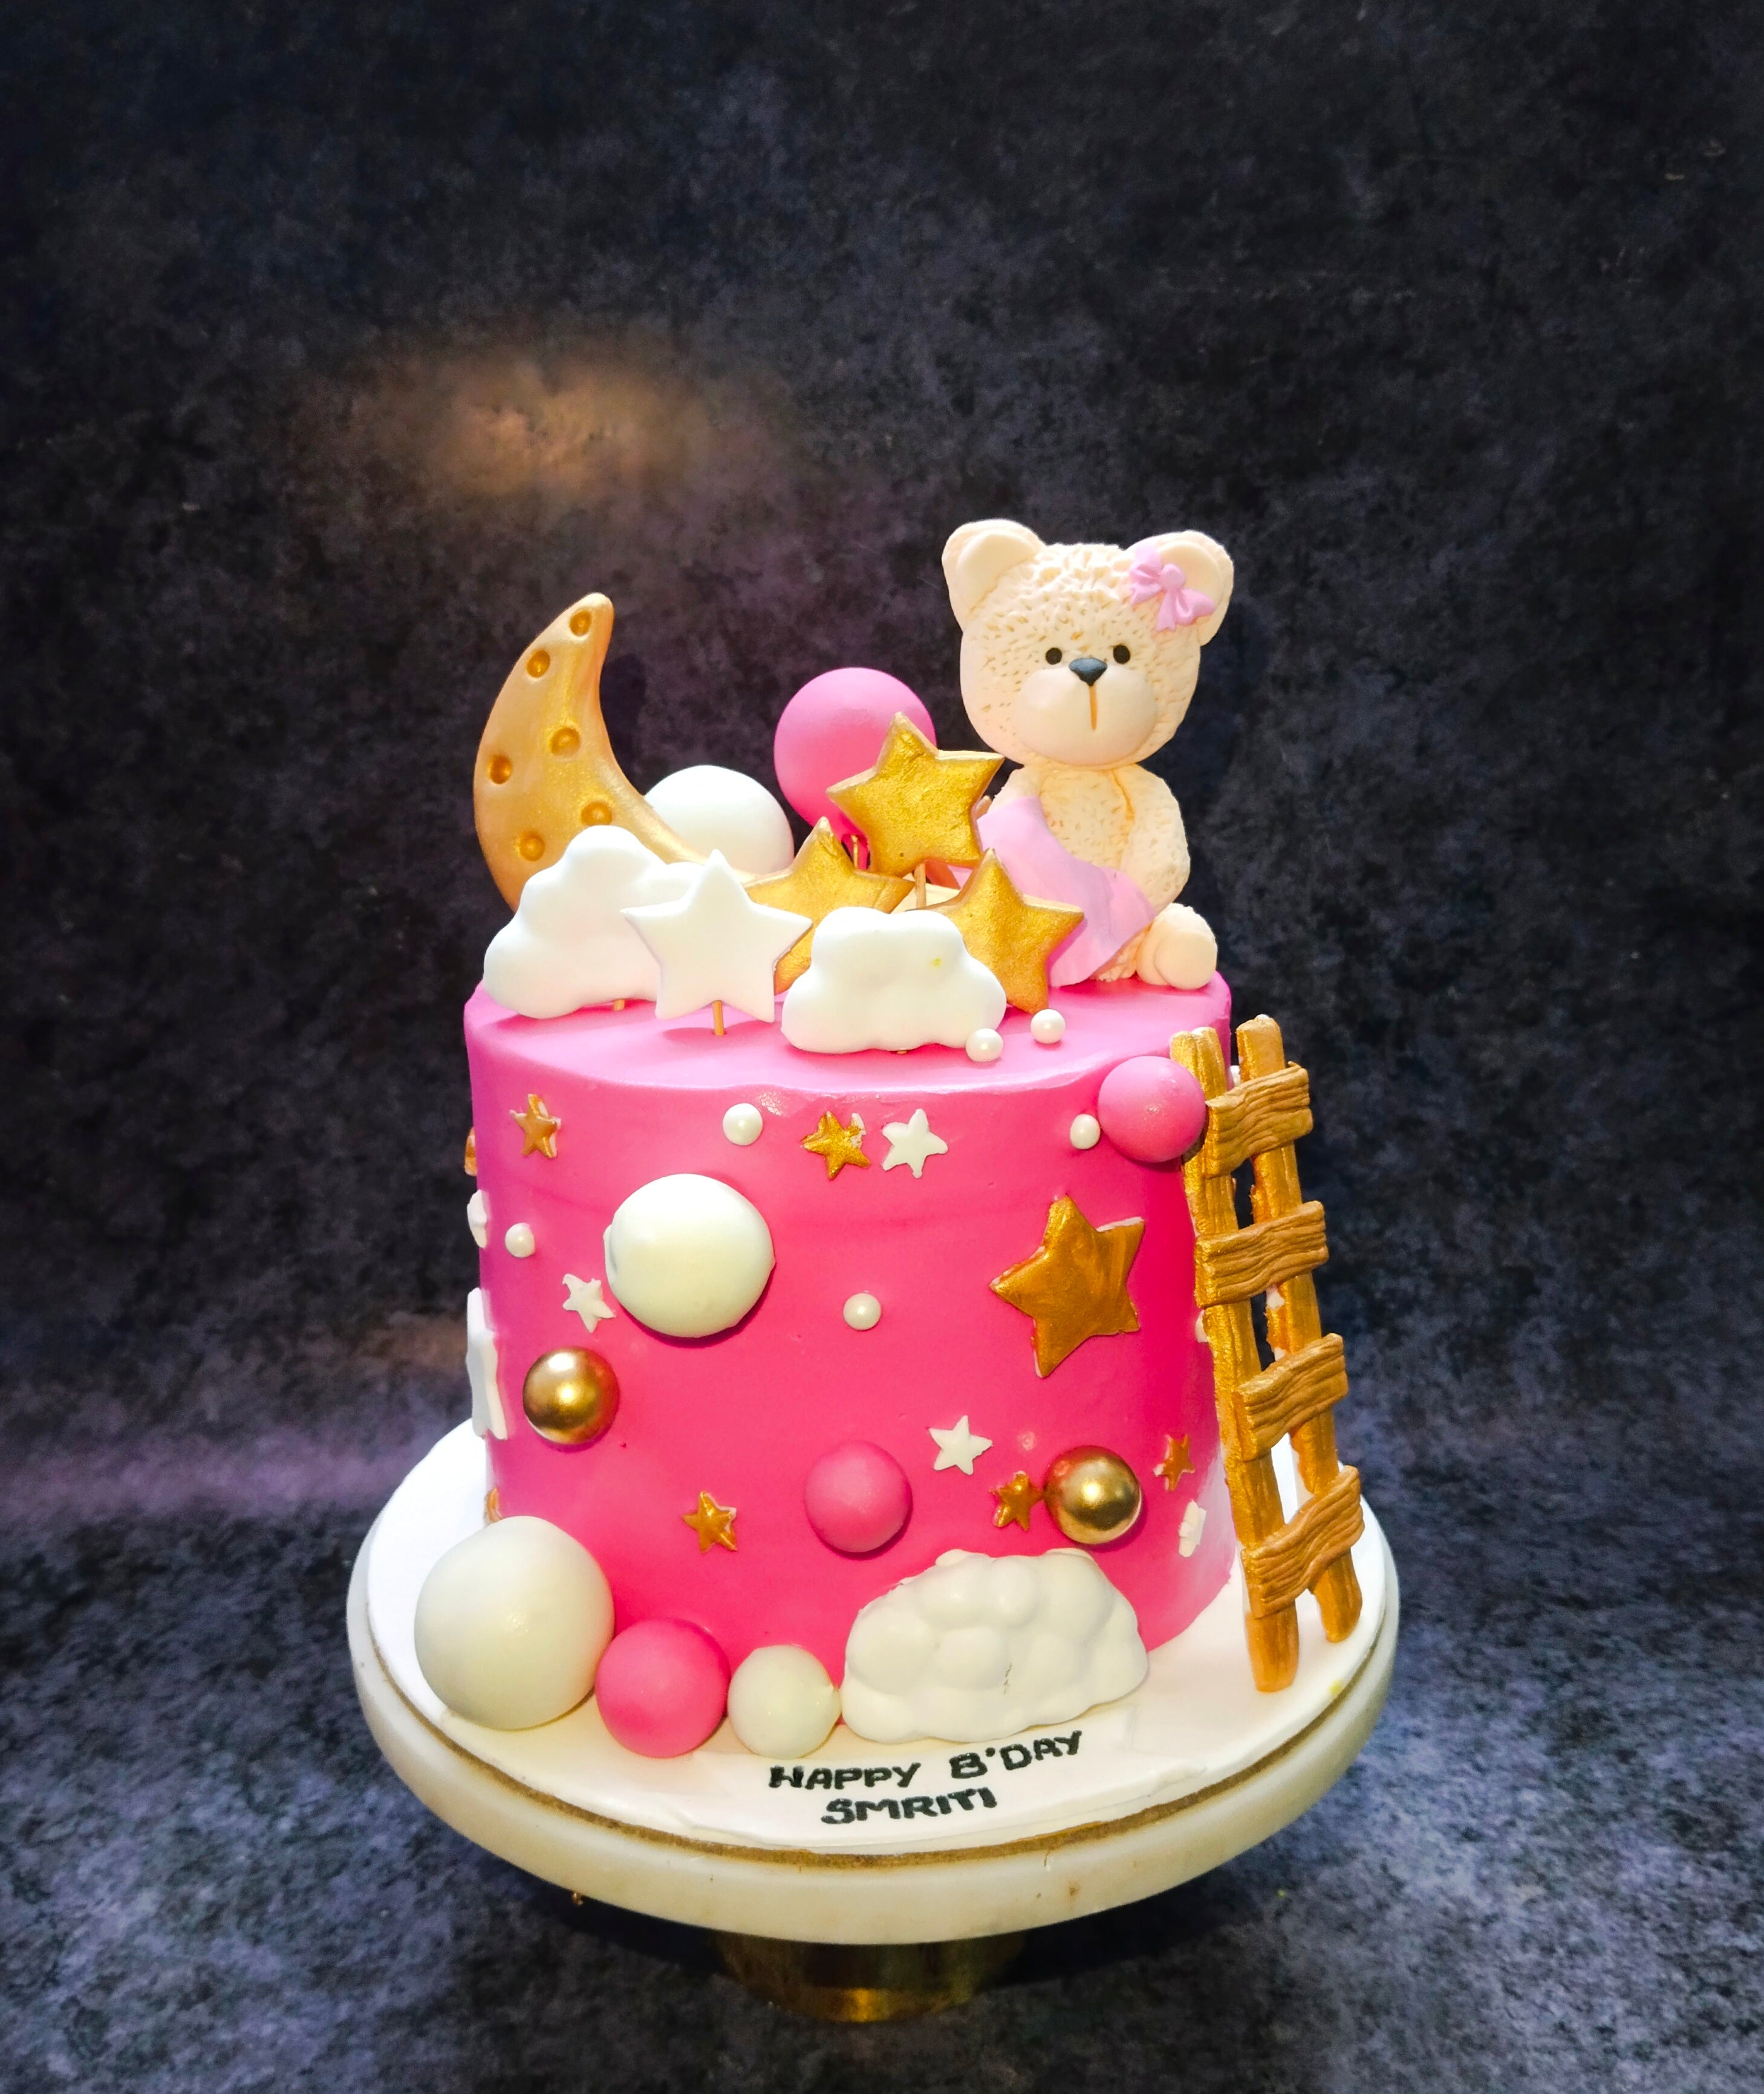 Whimsical Dreams: Introducing the Teddy & Moon Cake